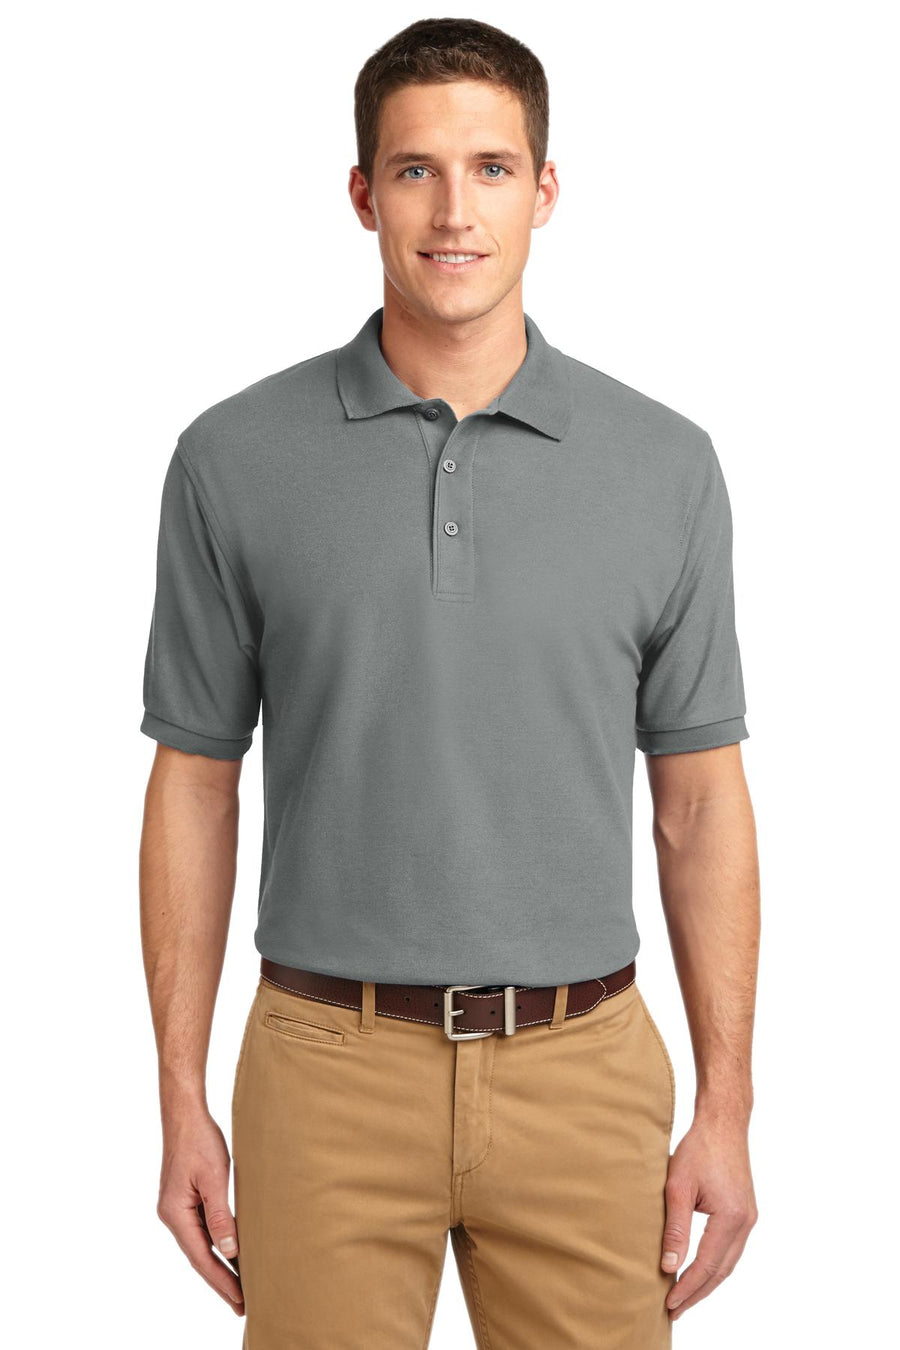 Port Authority Tall Silk Touch Polo.